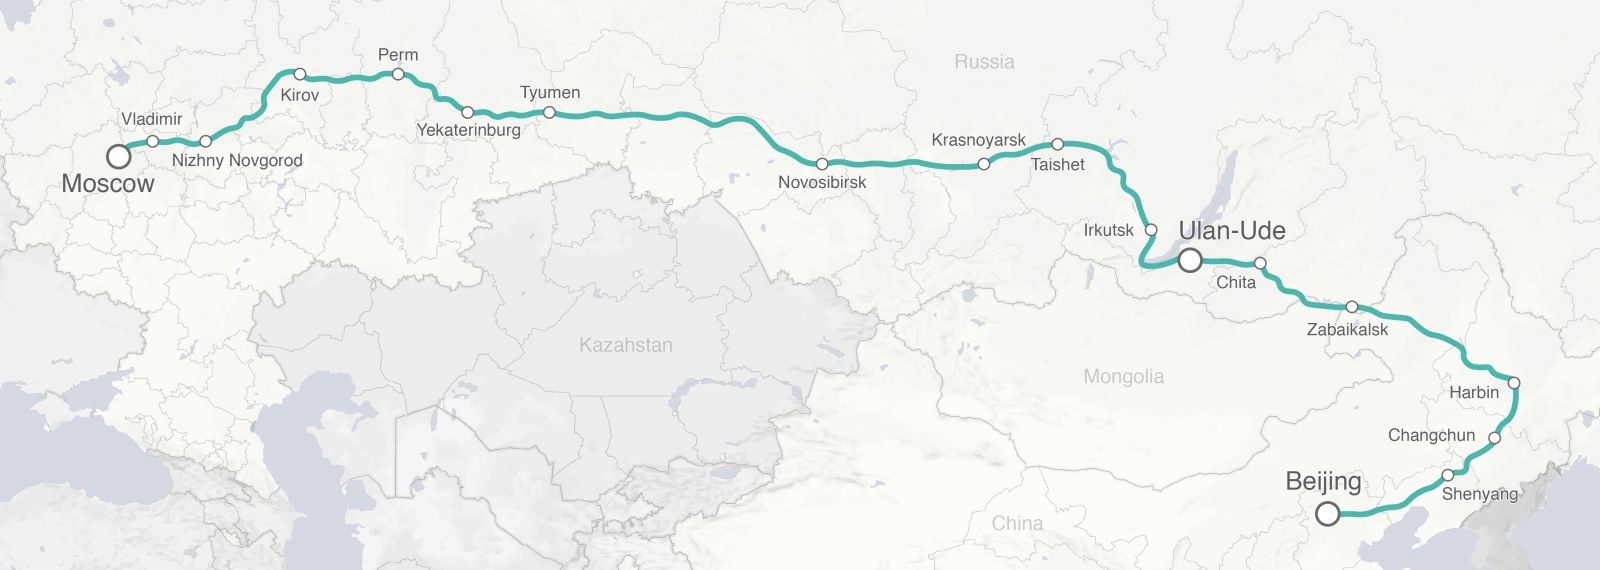 SIBERIA Travel Reference Map